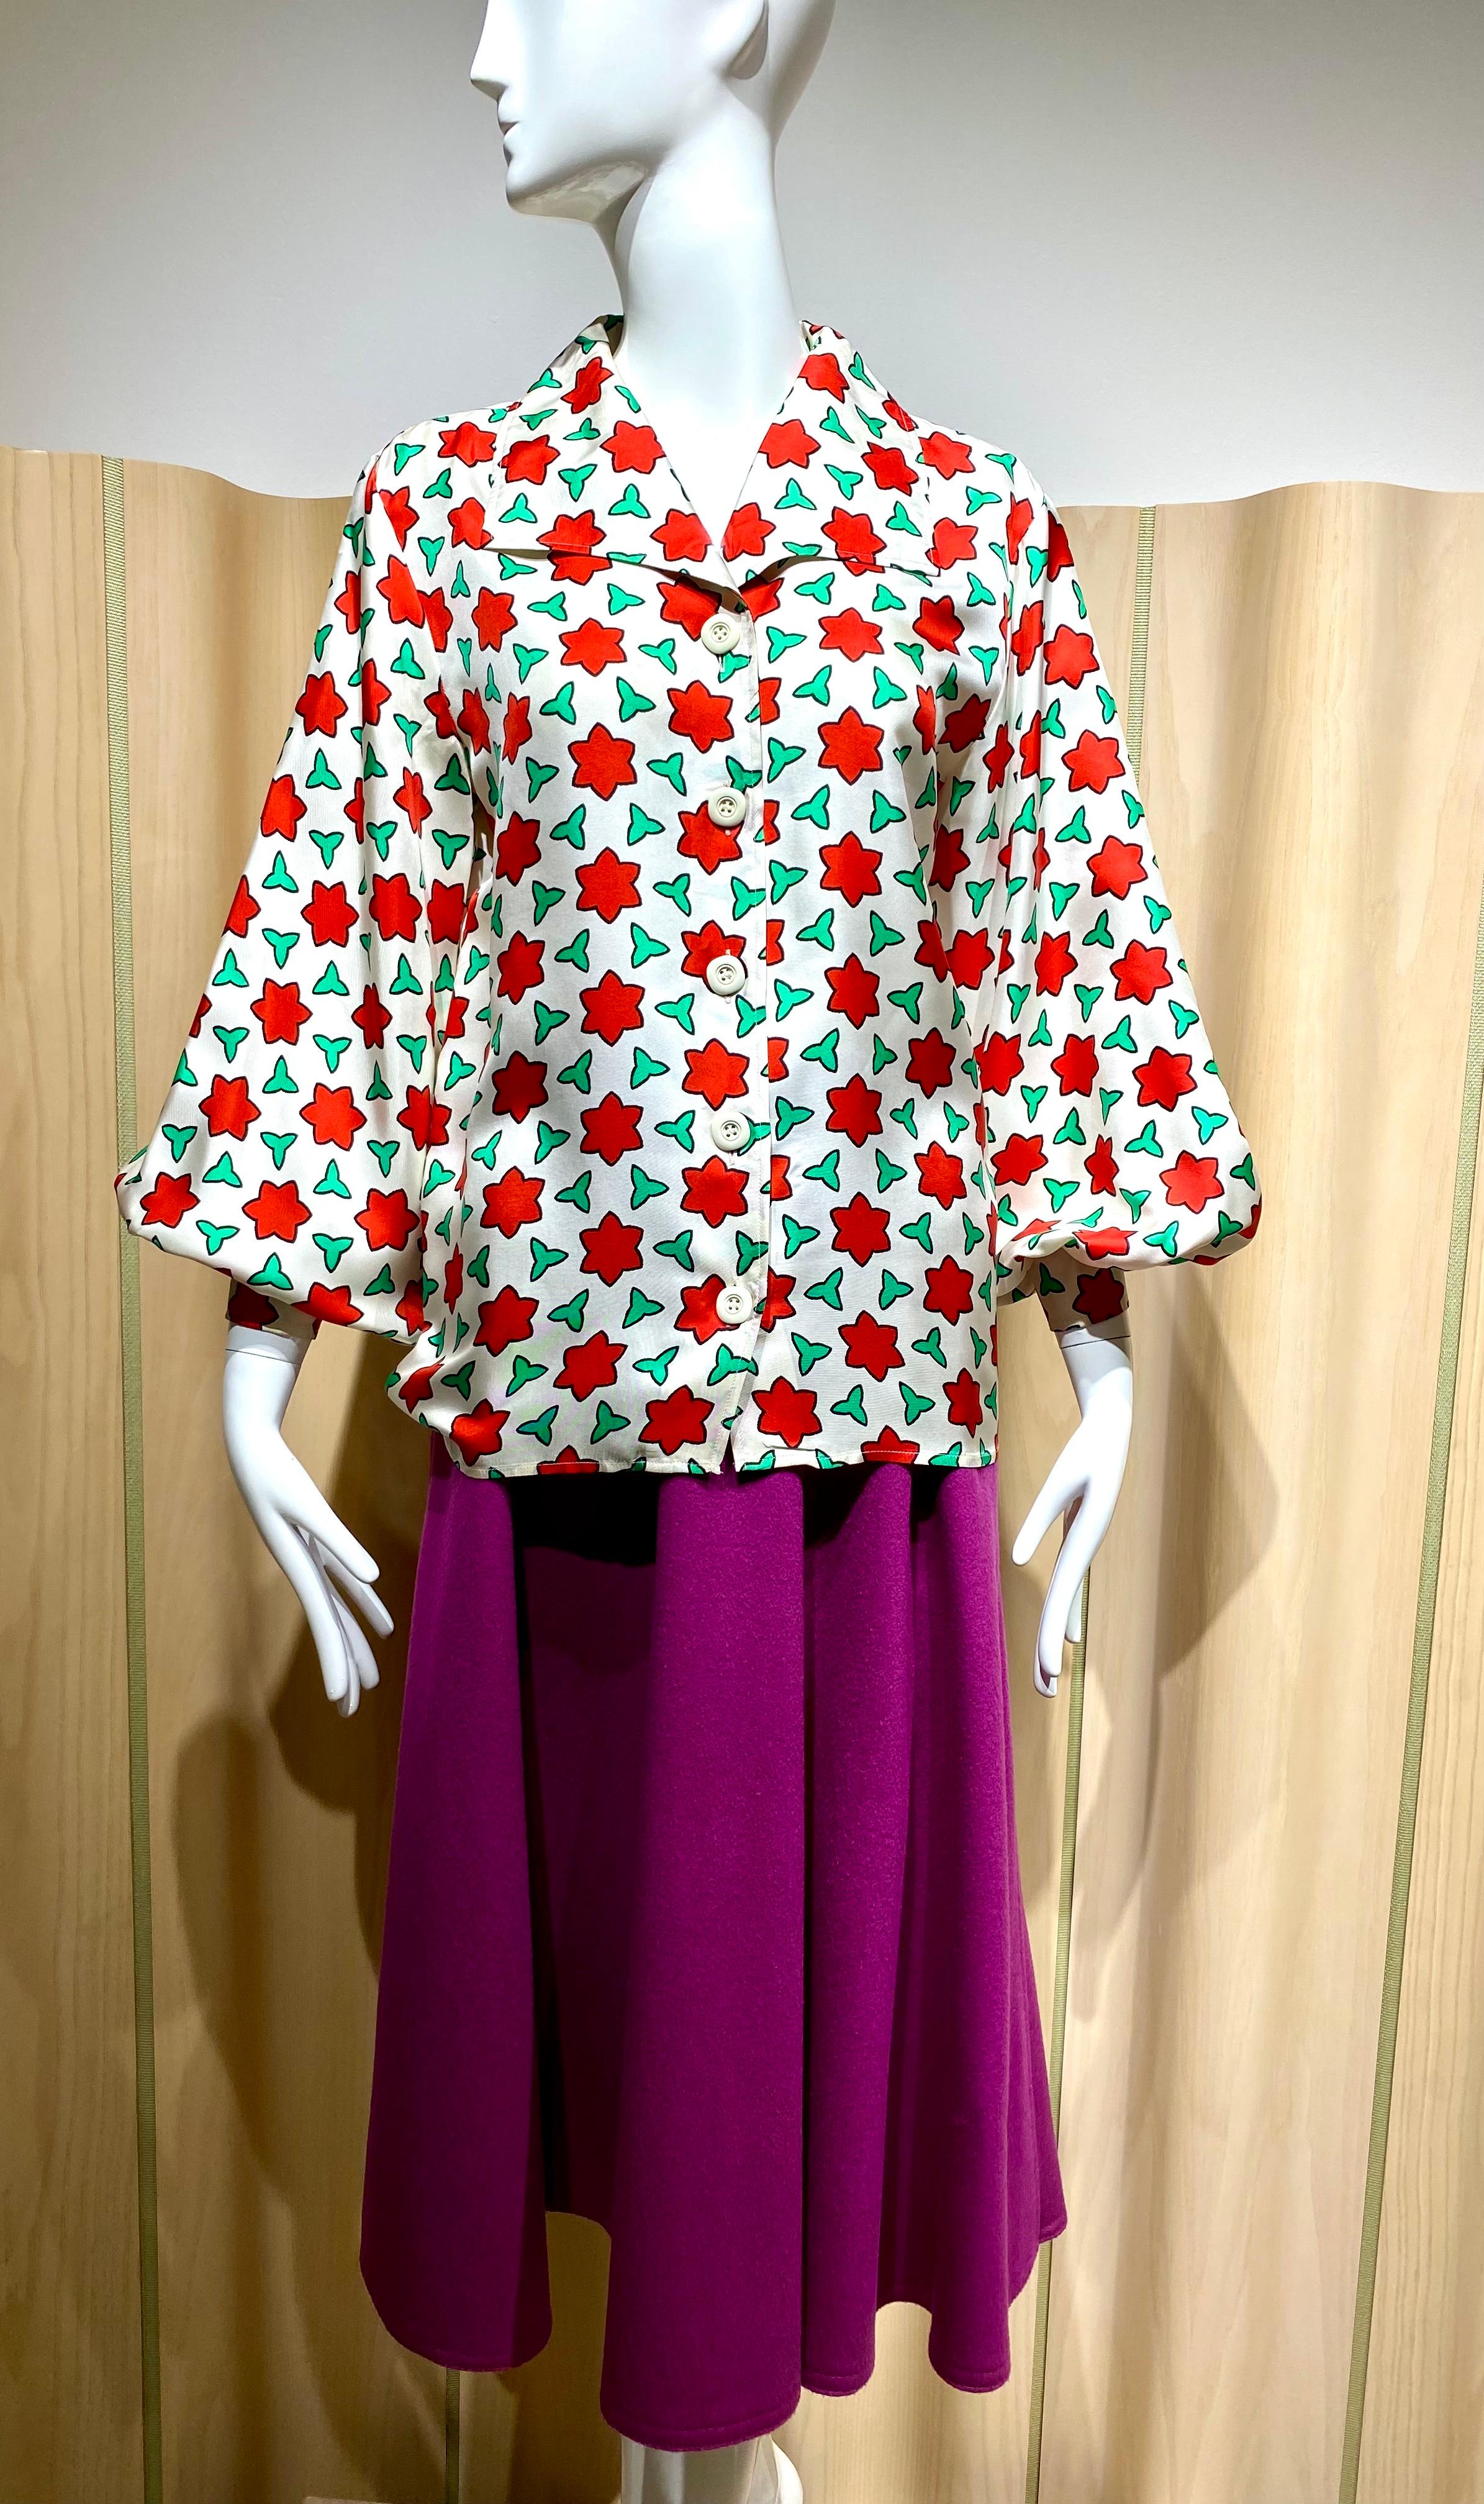 Vintage 70s Saint Laurent rive gauche white silk blouse in red and green stars print with puffy sleeves. Label marked size : 34
Bust: 38”
Size : 4/6